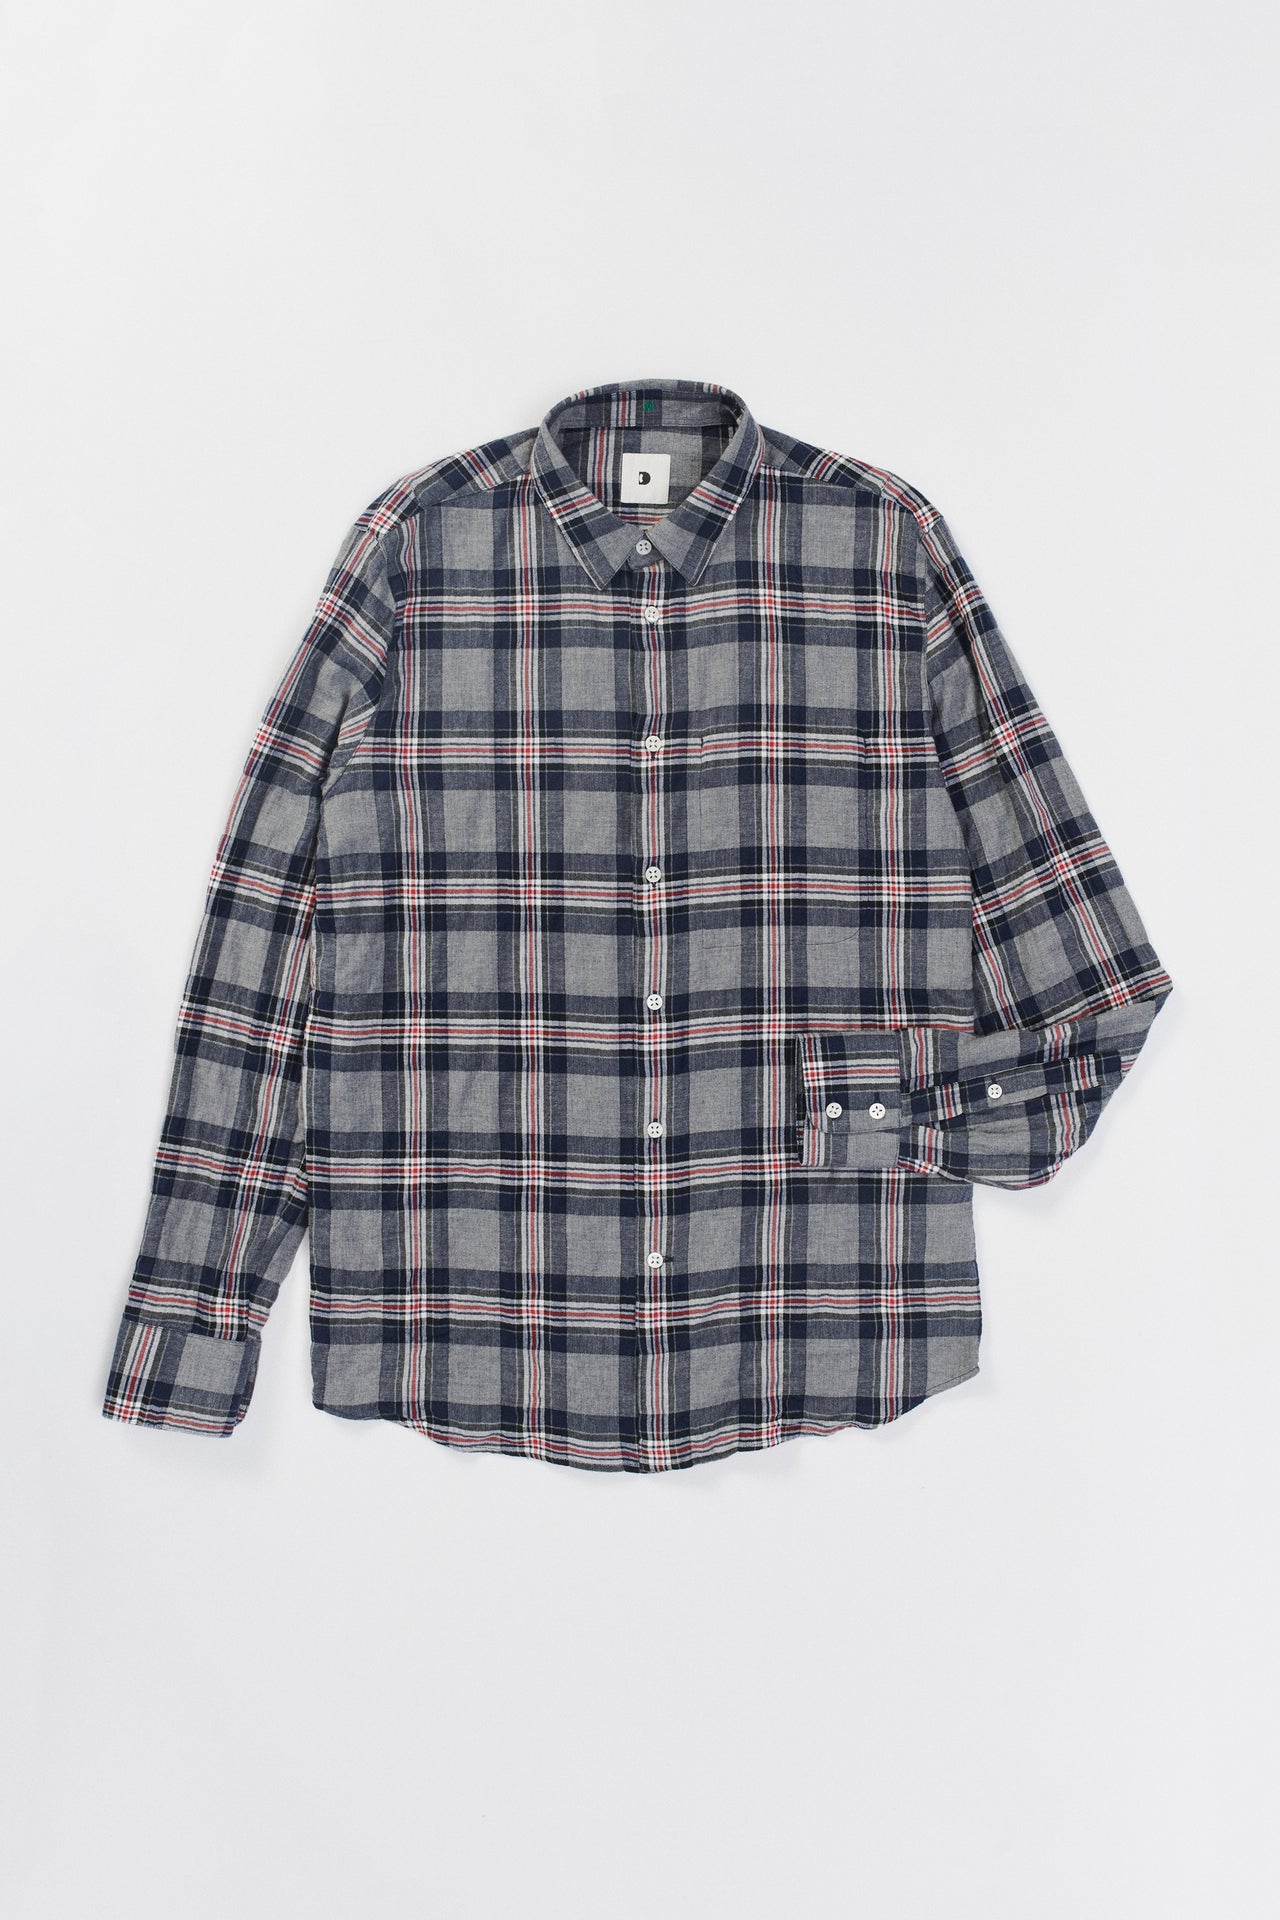 Feel Good Shirt in a Fine Blue, Red and Grey Chequered Japanese Cotton Flannel